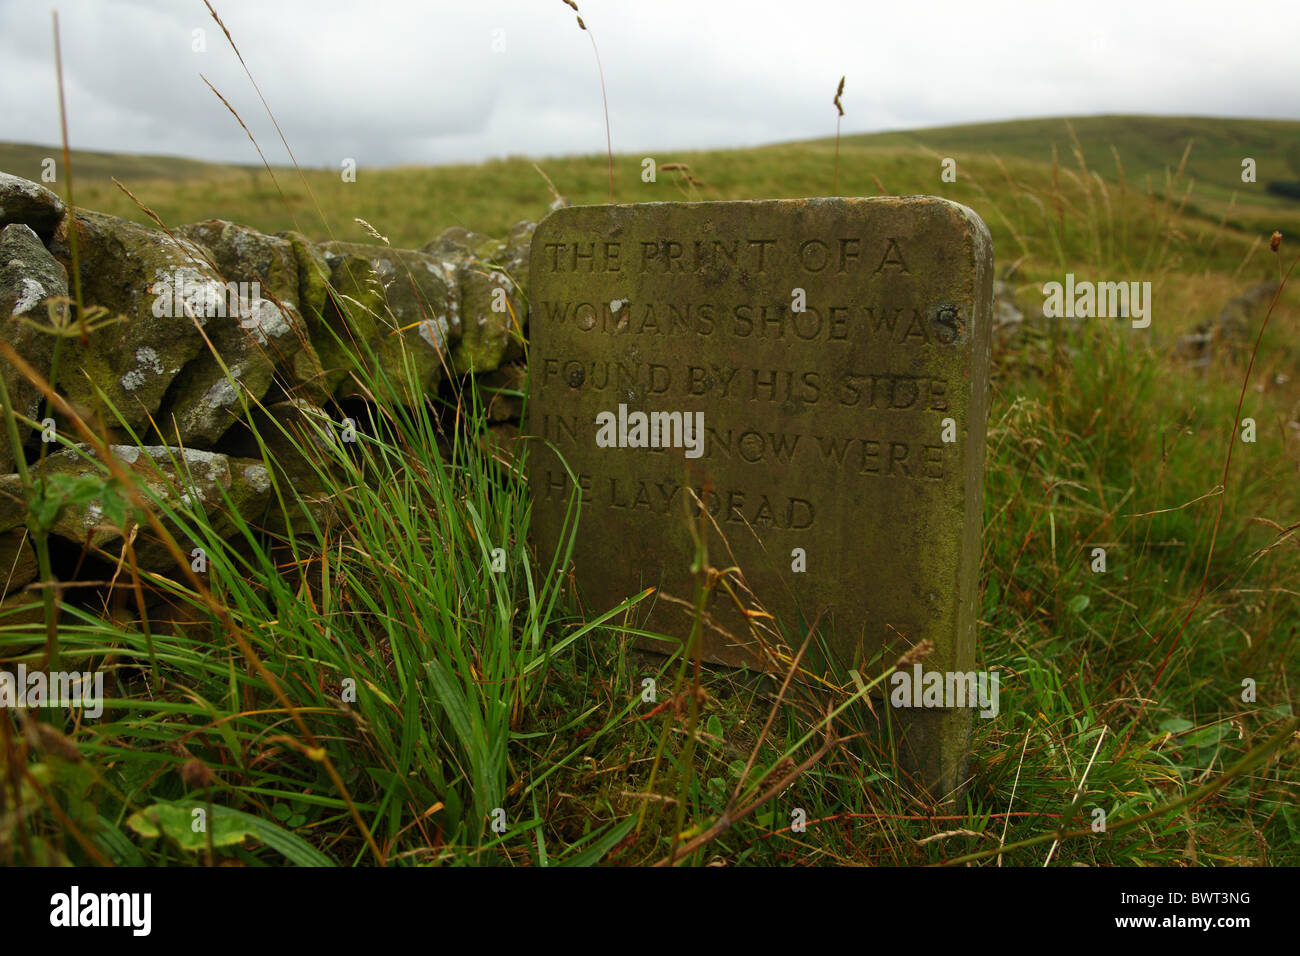 The weird stone from the novel Thursbitch by Alan Garner, found on a Cheshire lane in the peak district. Stock Photo